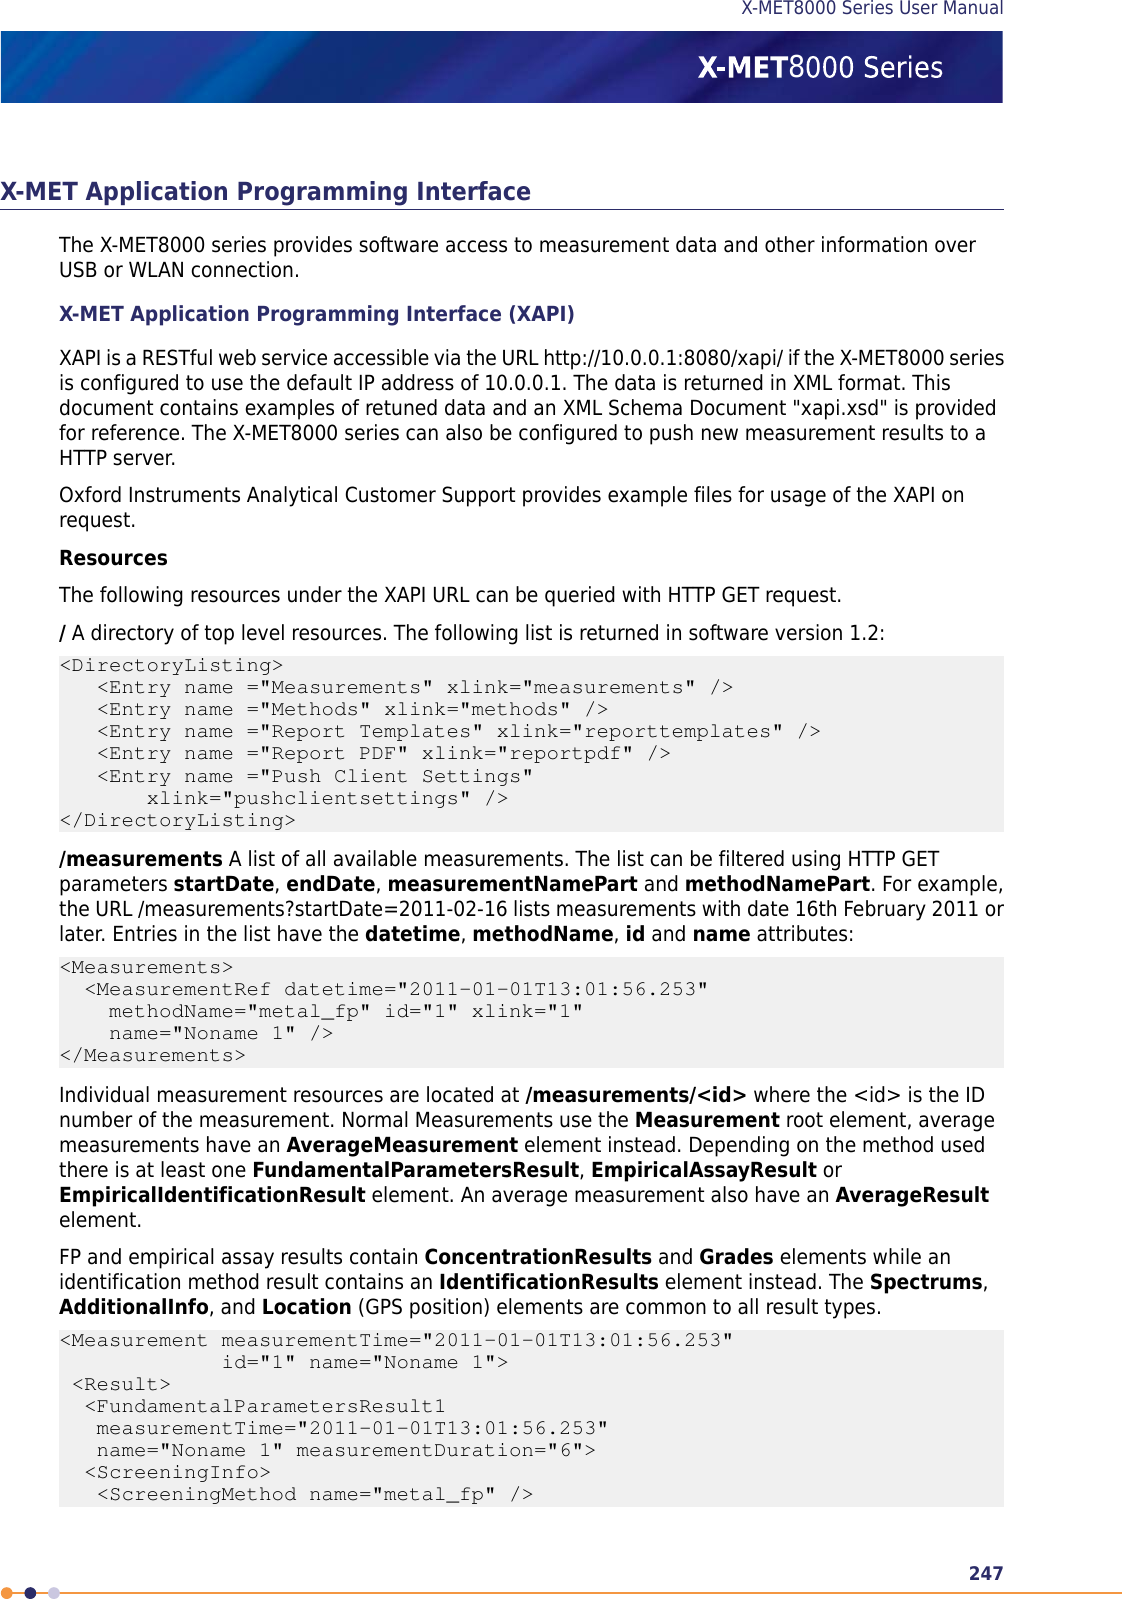 X-MET Application Programming InterfaceThe X-MET8000 series provides software access to measurement data and other information overUSB or WLAN connection.X-MET Application Programming Interface (XAPI)XAPI is a RESTful web service accessible via the URL http://10.0.0.1:8080/xapi/ if the X-MET8000 seriesis configured to use the default IP address of 10.0.0.1. The data is returned in XML format. Thisdocument contains examples of retuned data and an XML Schema Document &quot;xapi.xsd&quot; is providedfor reference. The X-MET8000 series can also be configured to push new measurement results to aHTTP server.Oxford Instruments Analytical Customer Support provides example files for usage of the XAPI onrequest.ResourcesThe following resources under the XAPI URL can be queried with HTTP GET request./A directory of top level resources. The following list is returned in software version 1.2:&lt;DirectoryListing&gt;   &lt;Entry name =&quot;Measurements&quot; xlink=&quot;measurements&quot; /&gt;   &lt;Entry name =&quot;Methods&quot; xlink=&quot;methods&quot; /&gt;   &lt;Entry name =&quot;Report Templates&quot; xlink=&quot;reporttemplates&quot; /&gt;   &lt;Entry name =&quot;Report PDF&quot; xlink=&quot;reportpdf&quot; /&gt;   &lt;Entry name =&quot;Push Client Settings&quot;       xlink=&quot;pushclientsettings&quot; /&gt;&lt;/DirectoryListing&gt;/measurements A list of all available measurements. The list can be filtered using HTTP GETparameters startDate,endDate,measurementNamePart and methodNamePart. For example,the URL /measurements?startDate=2011-02-16 lists measurements with date 16th February 2011 orlater. Entries in the list have the datetime,methodName,id and name attributes:&lt;Measurements&gt;  &lt;MeasurementRef datetime=&quot;2011-01-01T13:01:56.253&quot;    methodName=&quot;metal_fp&quot; id=&quot;1&quot; xlink=&quot;1&quot;    name=&quot;Noname 1&quot; /&gt;&lt;/Measurements&gt;Individual measurement resources are located at /measurements/&lt;id&gt; where the &lt;id&gt; is the IDnumber of the measurement. Normal Measurements use the Measurement root element, averagemeasurements have an AverageMeasurement element instead. Depending on the method usedthere is at least one FundamentalParametersResult,EmpiricalAssayResult orEmpiricalIdentificationResult element. An average measurement also have an AverageResultelement.FP and empirical assay results contain ConcentrationResults and Grades elements while anidentification method result contains an IdentificationResults element instead. The Spectrums,AdditionalInfo, and Location (GPS position) elements are common to all result types.&lt;Measurement measurementTime=&quot;2011-01-01T13:01:56.253&quot;             id=&quot;1&quot; name=&quot;Noname 1&quot;&gt; &lt;Result&gt;  &lt;FundamentalParametersResult1   measurementTime=&quot;2011-01-01T13:01:56.253&quot;   name=&quot;Noname 1&quot; measurementDuration=&quot;6&quot;&gt;  &lt;ScreeningInfo&gt;   &lt;ScreeningMethod name=&quot;metal_fp&quot; /&gt;247X-MET8000 Series User Manual8